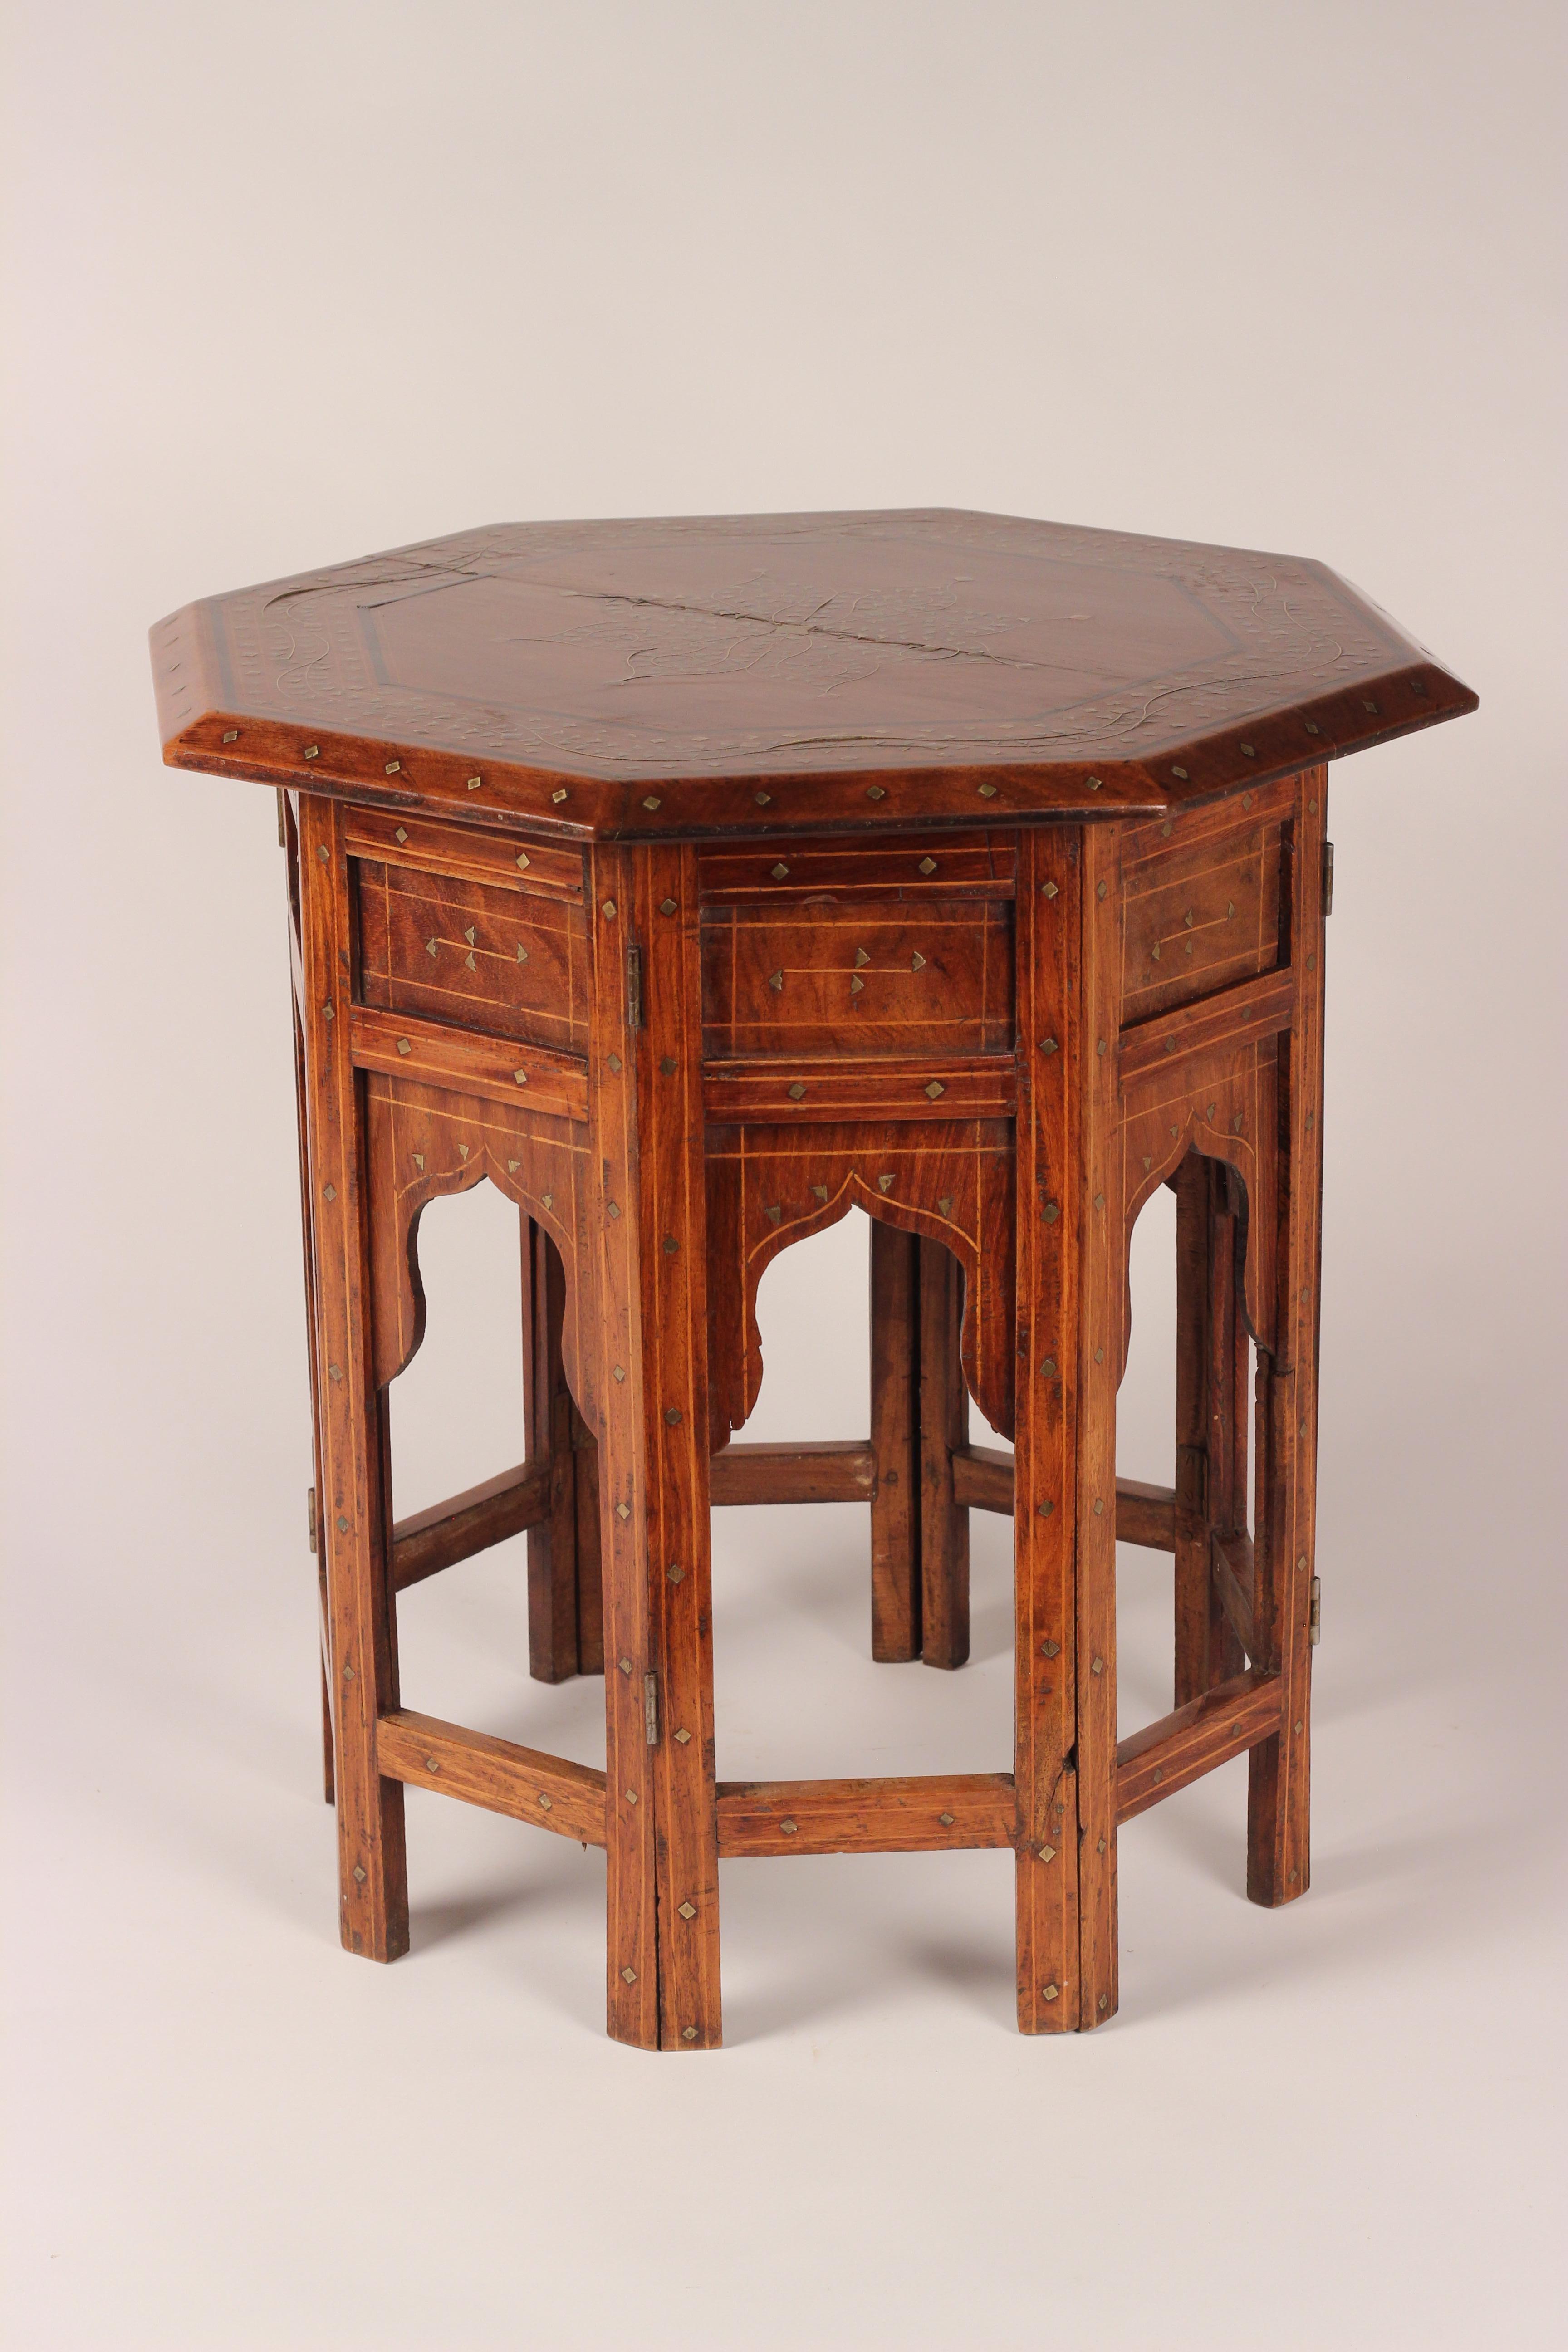 Carved Boho Chic Style Anglo Indian Bombay Rosewood and Brass Inlay Octagonal Table For Sale